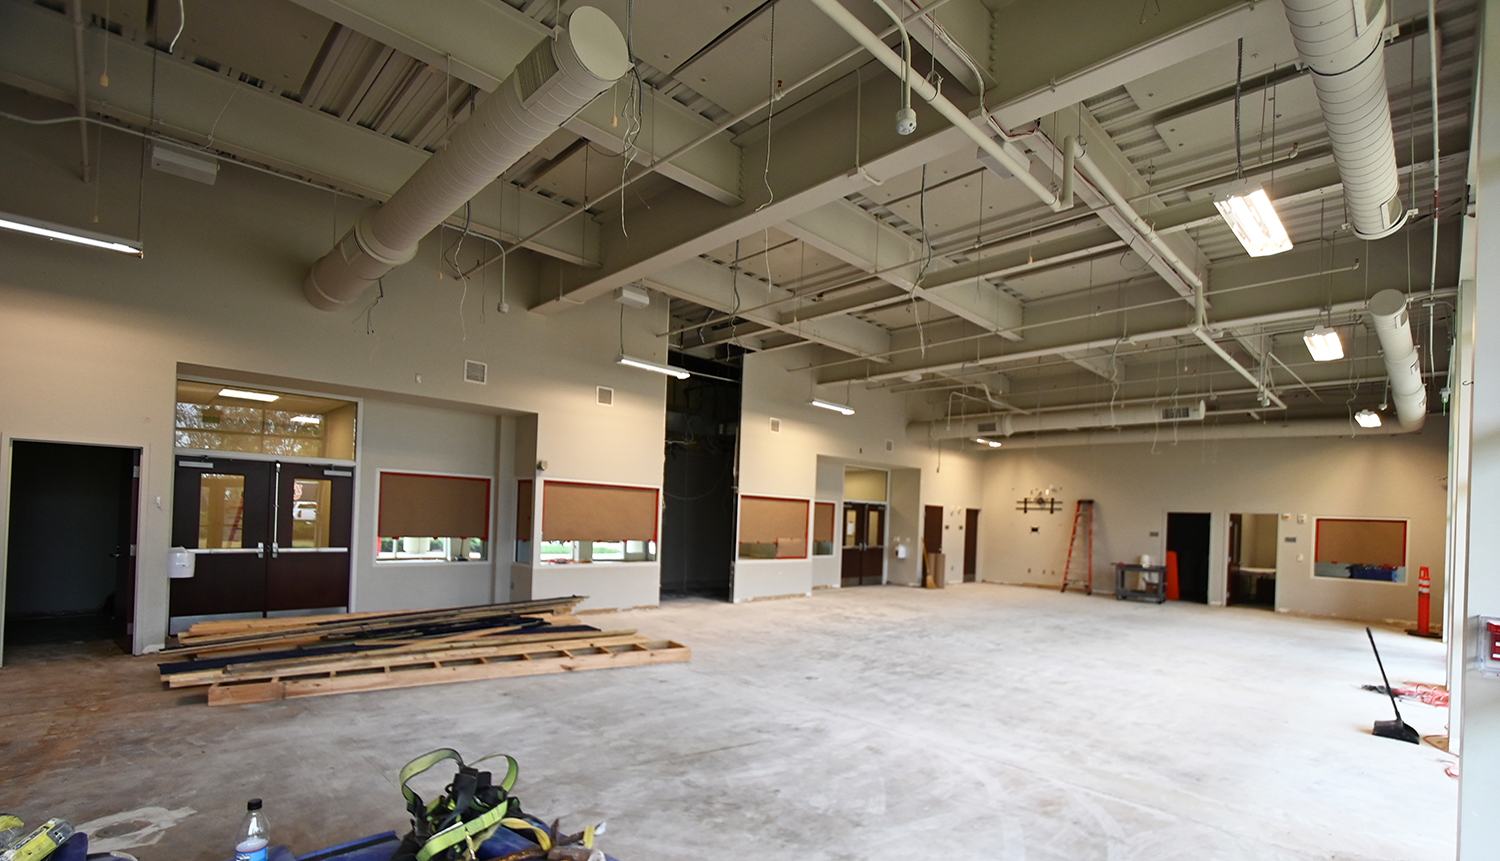 Renovation of Space for the School of Kinesiology's Doctor of Physical Therapy Program